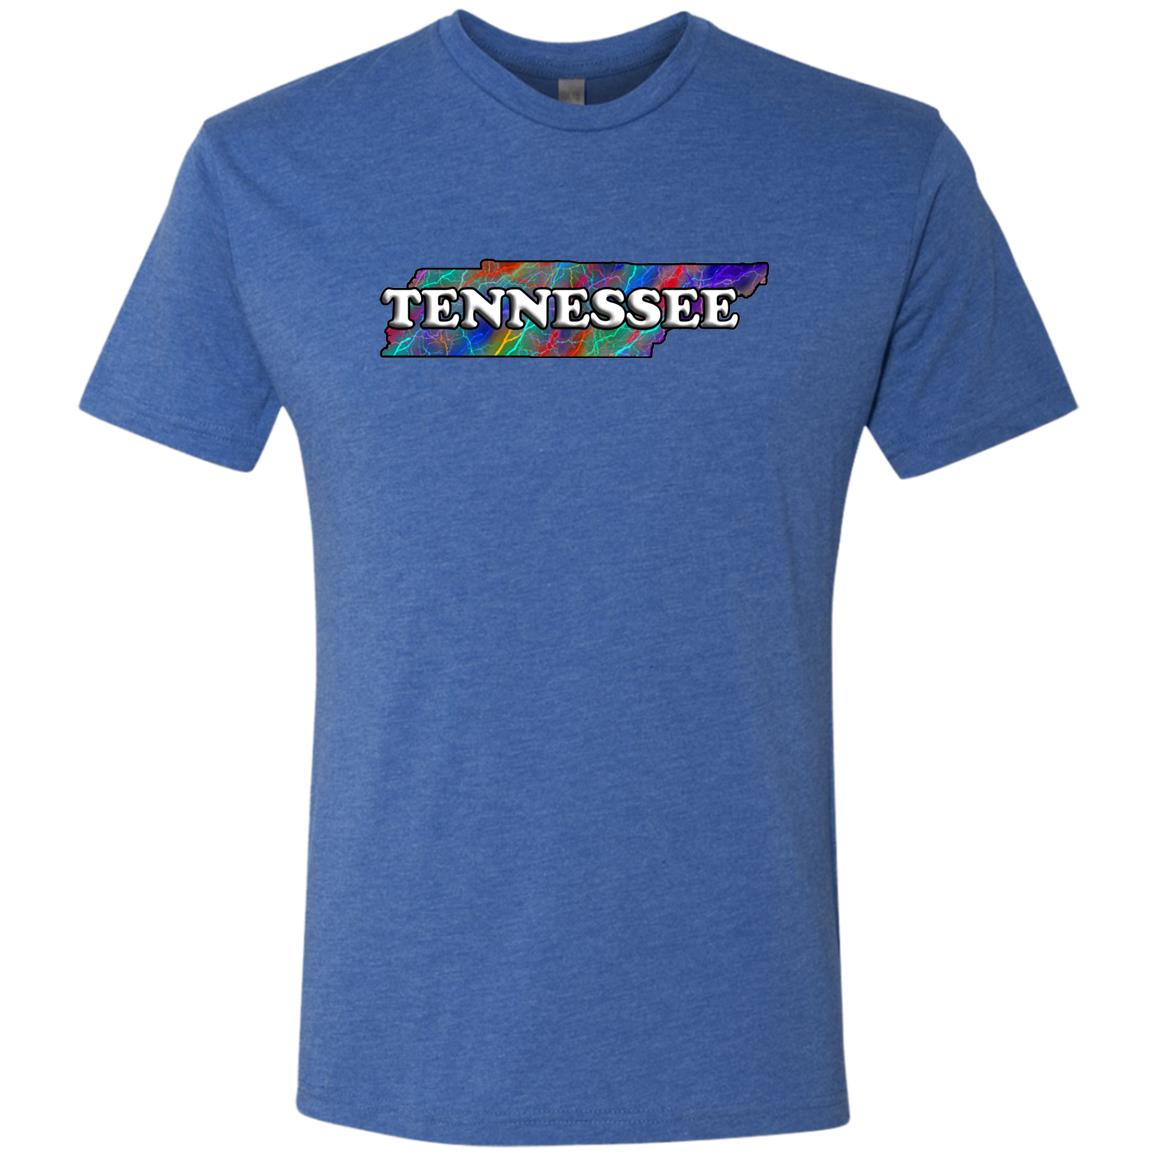 Tennessee State T-Shirt